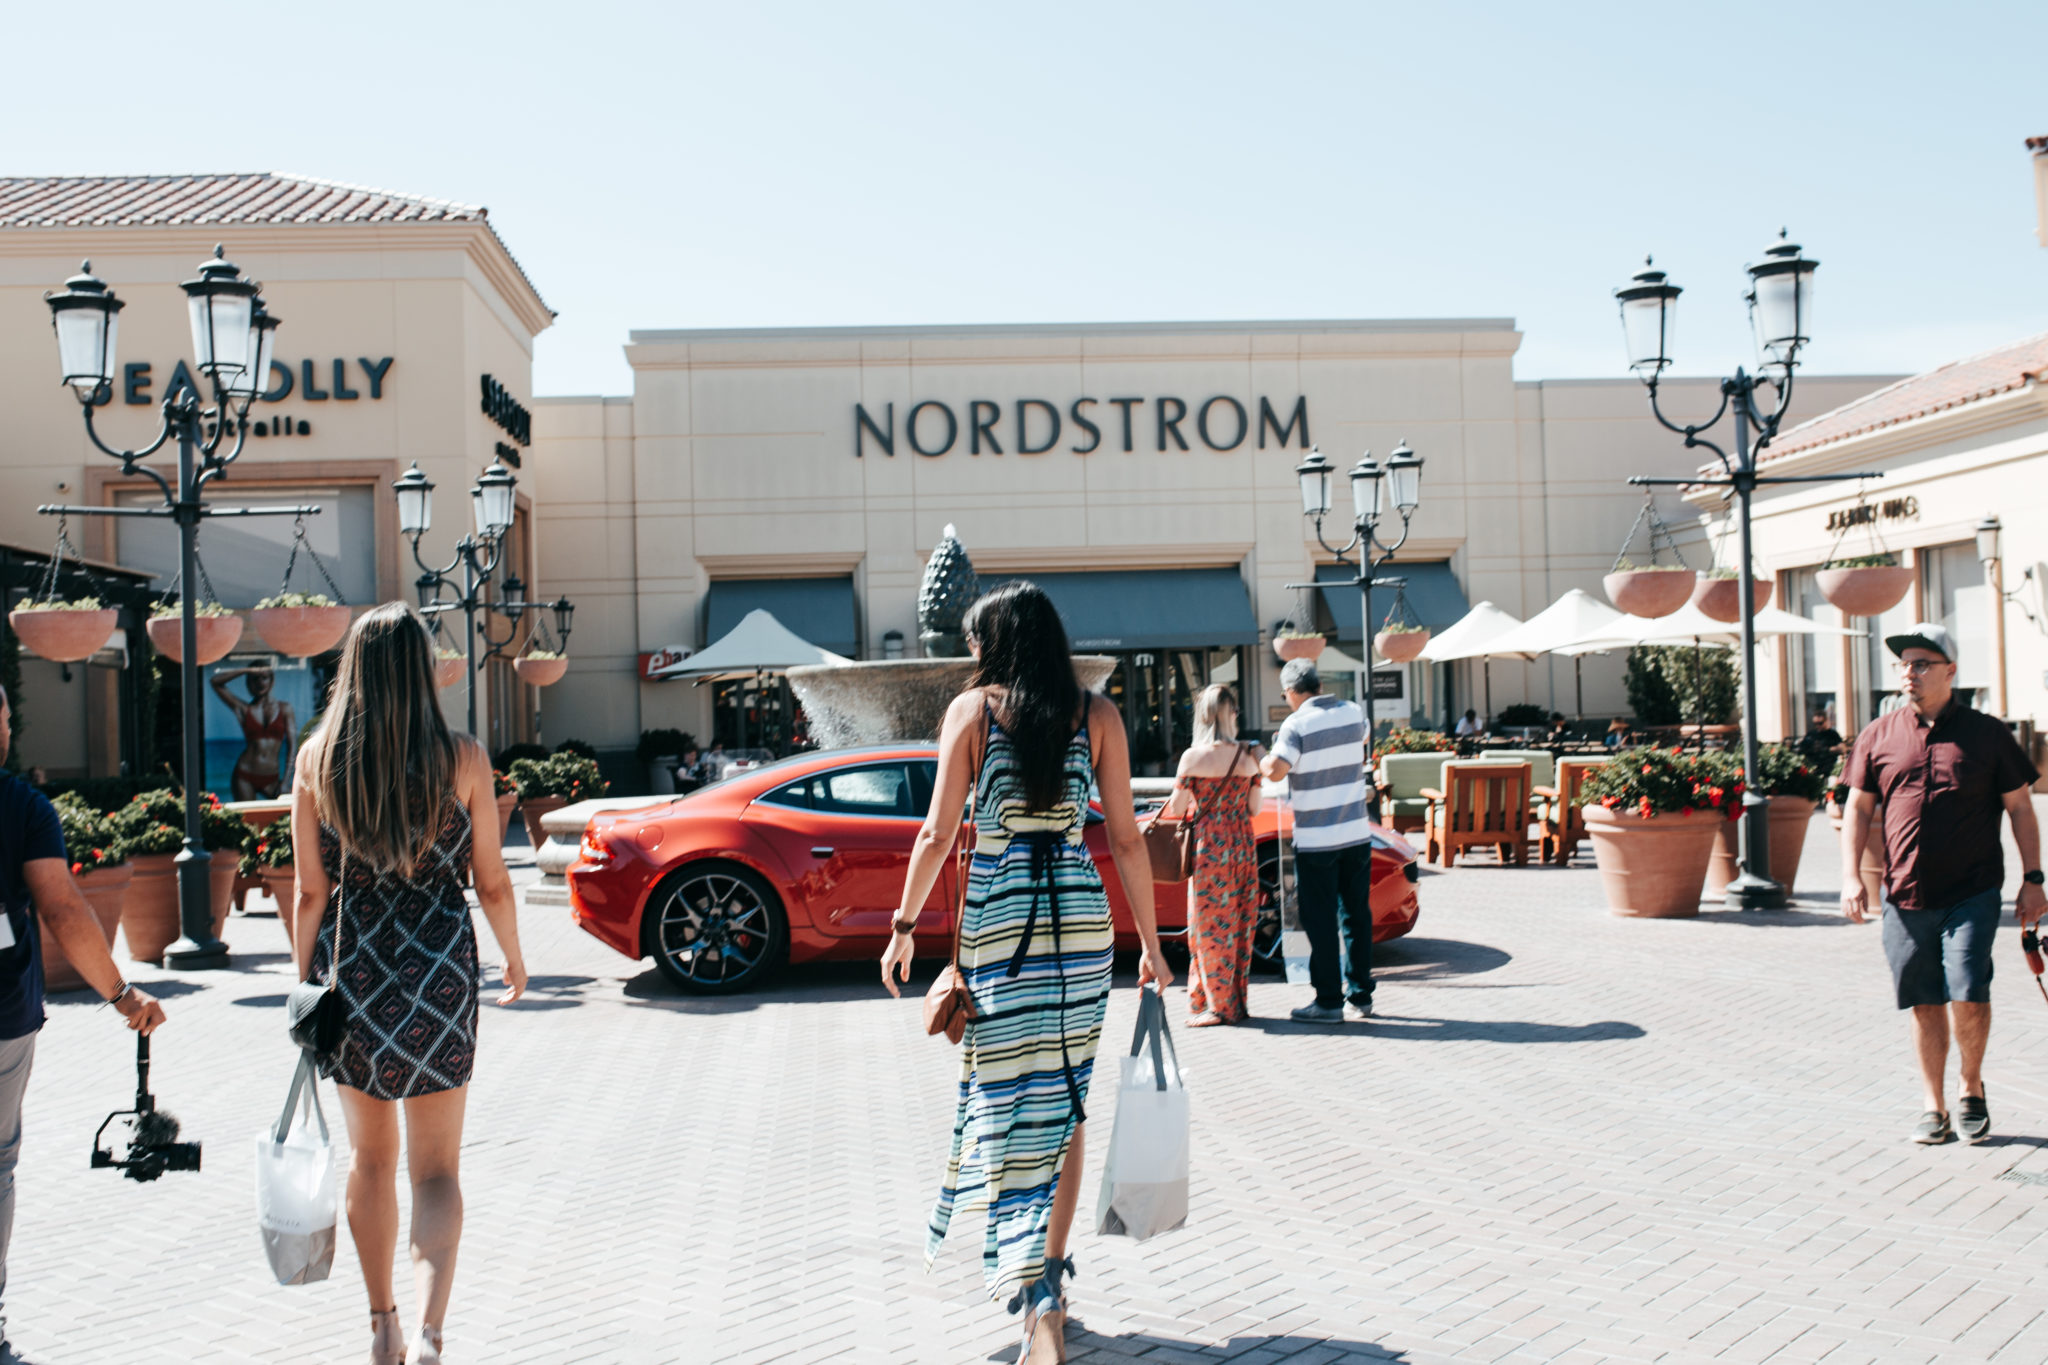 THE LOT on X: THE LOT Fashion Island in Newport Beach is now open